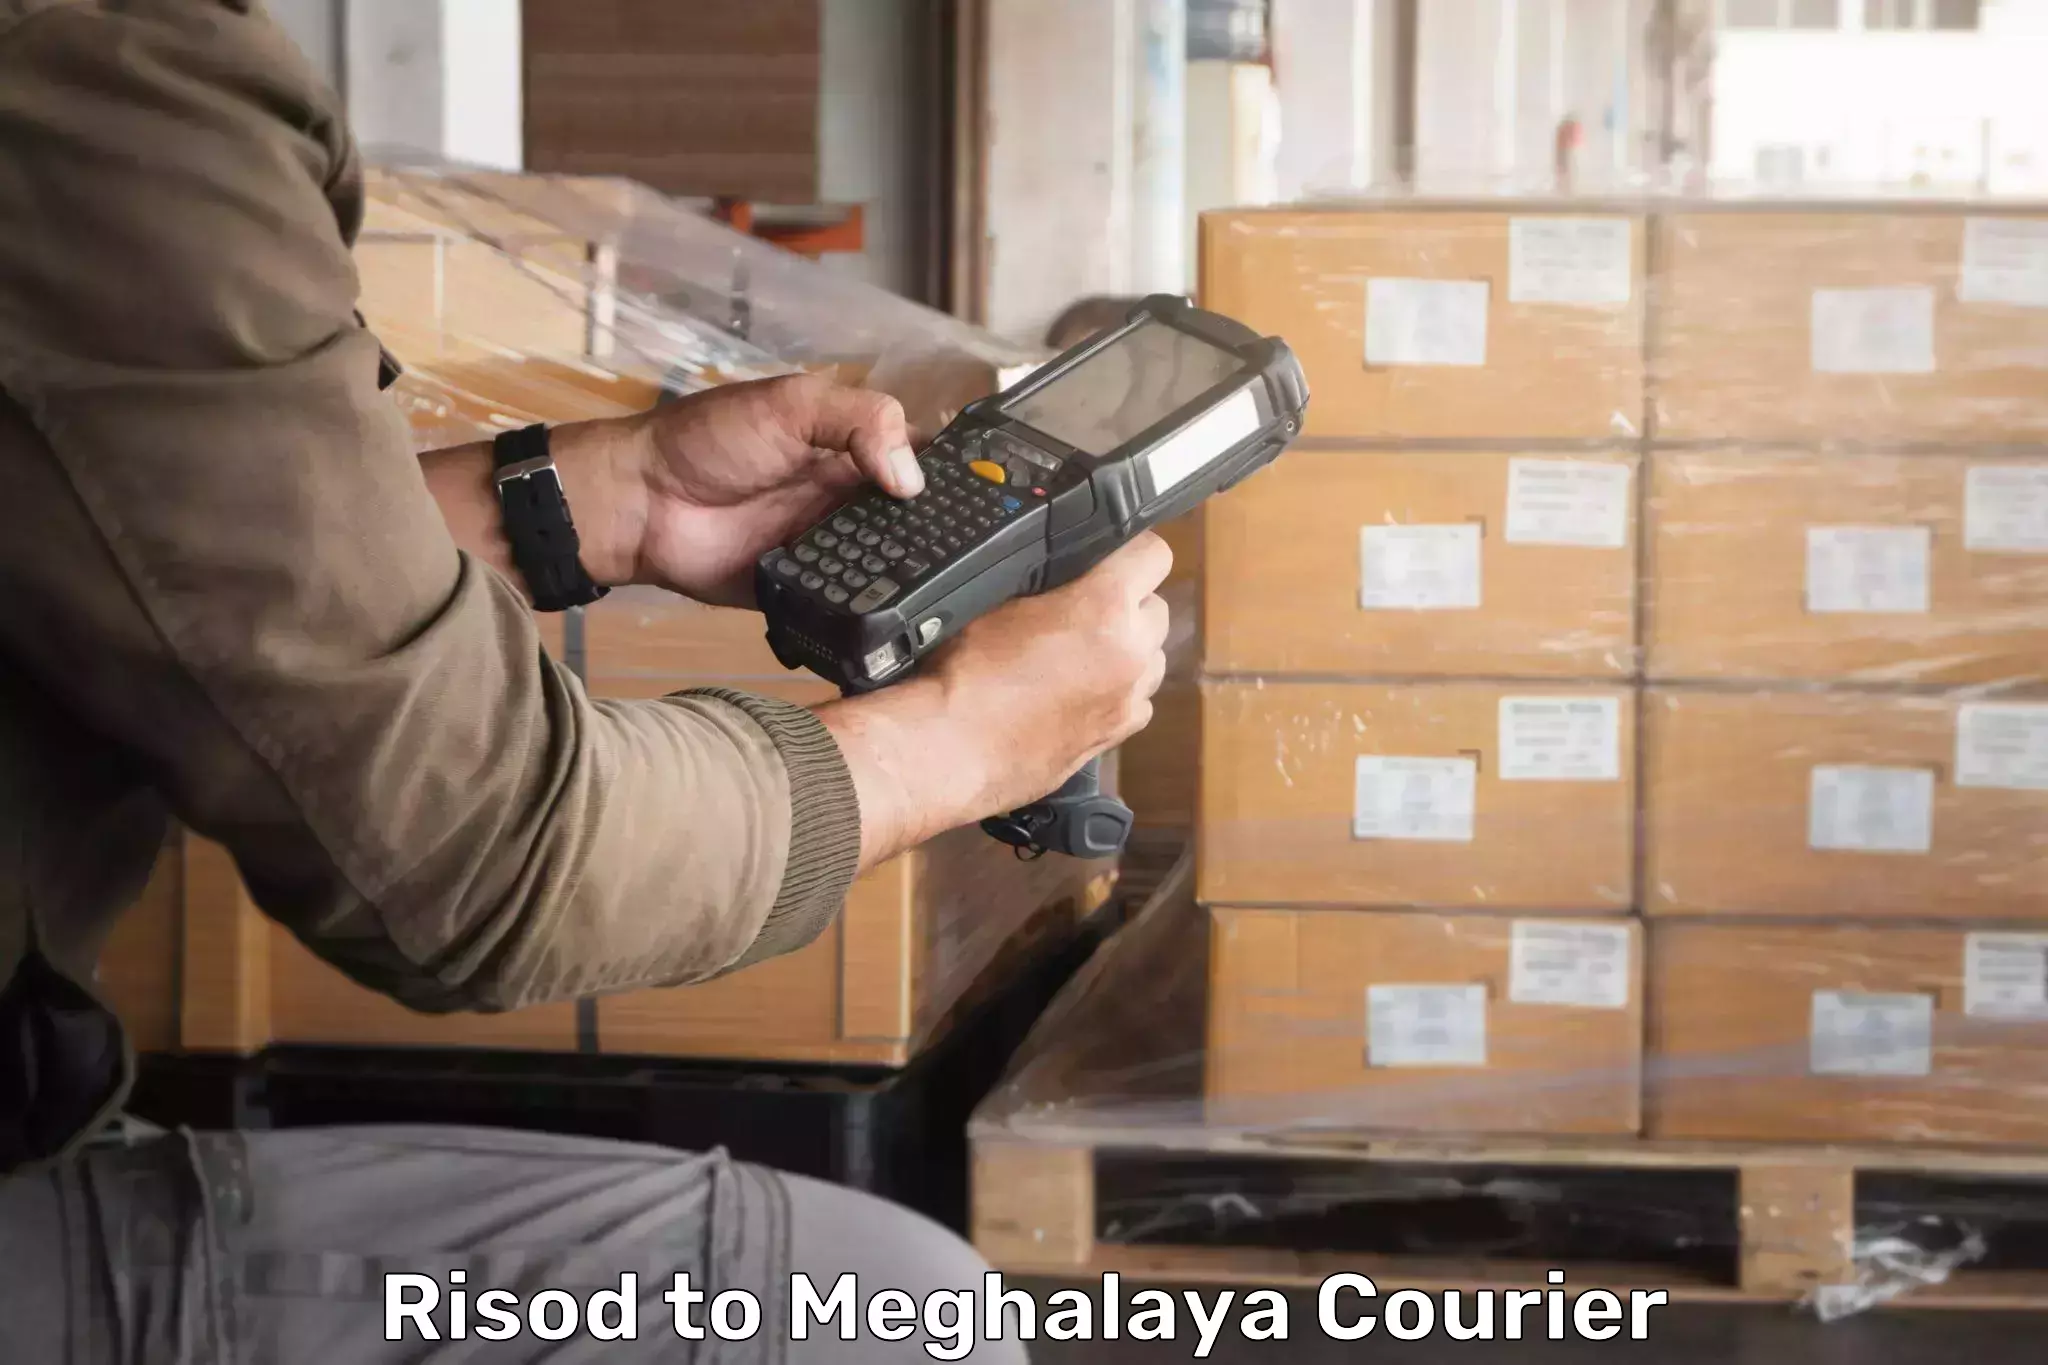 State-of-the-art courier technology Risod to Phulbari